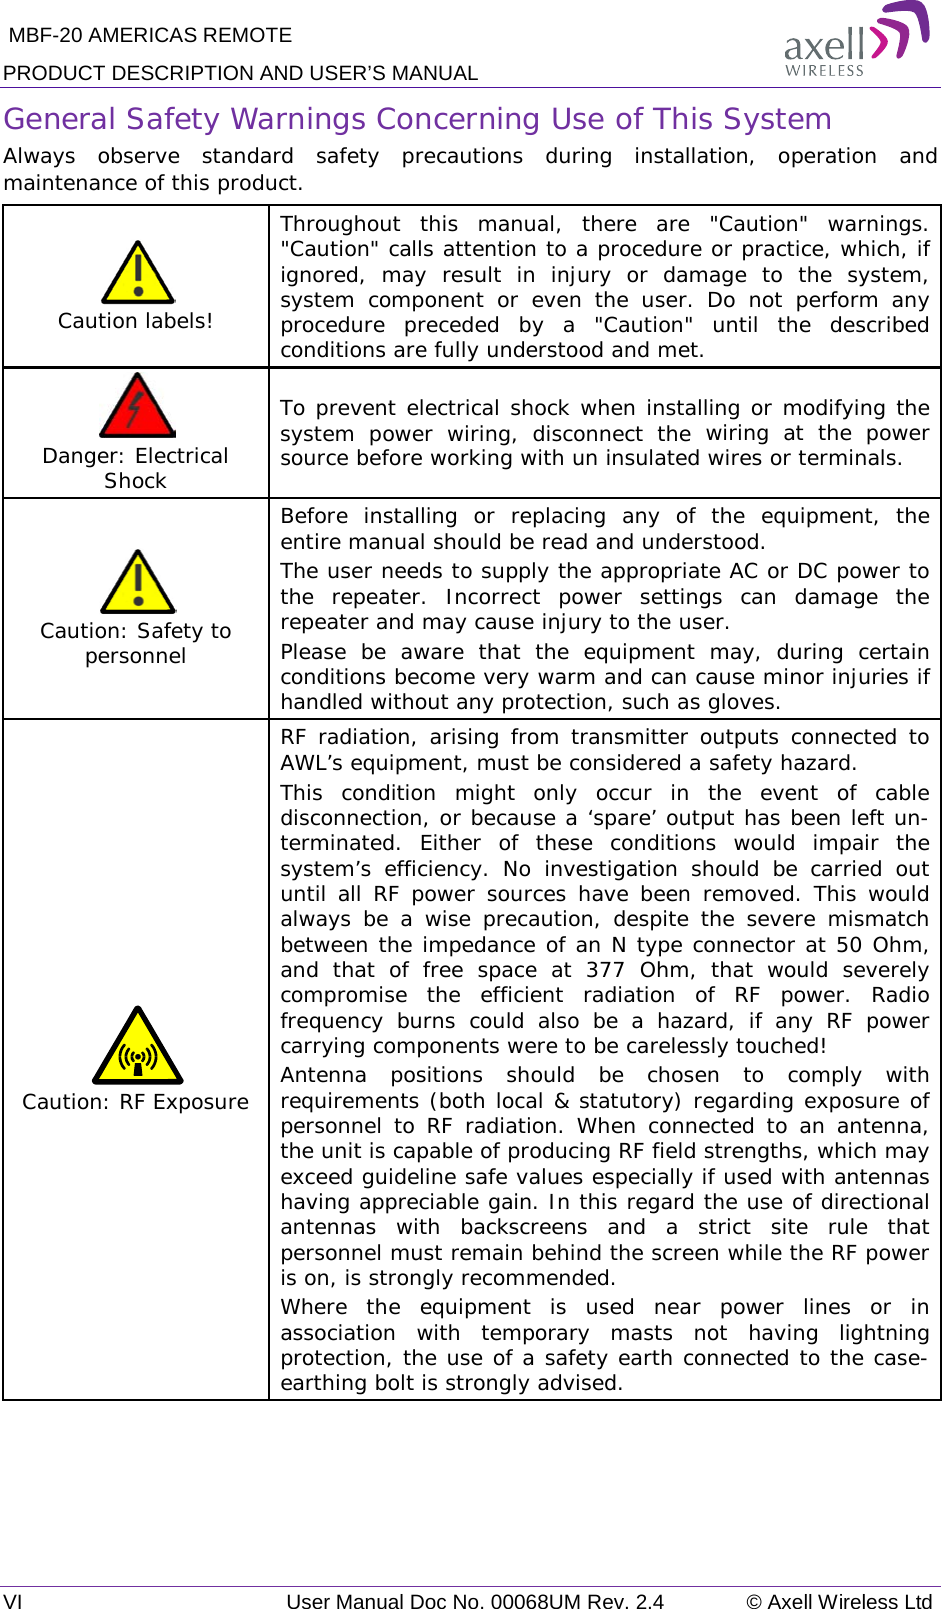  MBF-20 AMERICAS REMOTE PRODUCT DESCRIPTION AND USER’S MANUAL VI   User Manual Doc No. 00068UM Rev. 2.4 © Axell Wireless Ltd General Safety Warnings Concerning Use of This System Always observe standard safety precautions during installation, operation and maintenance of this product.  Caution labels! Throughout this manual, there are &quot;Caution&quot; warnings. &quot;Caution&quot; calls attention to a procedure or practice, which, if ignored, may result in injury or damage to the system, system component or even the user. Do not perform any procedure preceded by a &quot;Caution&quot; until the described conditions are fully understood and met.   Danger: Electrical Shock To prevent electrical shock when installing or modifying the system power wiring, disconnect the wiring at the power source before working with un insulated wires or terminals.  Caution: Safety to personnel Before installing or replacing any of the equipment, the entire manual should be read and understood. The user needs to supply the appropriate AC or DC power to the repeater. Incorrect power settings can damage the repeater and may cause injury to the user. Please be aware that the equipment may, during certain conditions become very warm and can cause minor injuries if handled without any protection, such as gloves.  Caution: RF Exposure RF radiation, arising from transmitter outputs connected to AWL’s equipment, must be considered a safety hazard. This condition might only occur in the event of cable disconnection, or because a ‘spare’ output has been left un-terminated. Either of these conditions would impair the system’s efficiency. No investigation should be carried out until all RF power sources have been removed. This would always be a wise precaution, despite the severe mismatch between the impedance of an N type connector at 50 Ohm, and that of free space at 377 Ohm,  that would severely compromise the efficient radiation of RF power. Radio frequency burns could also be a hazard, if any RF power carrying components were to be carelessly touched! Antenna positions should be chosen to comply with requirements (both local &amp; statutory) regarding exposure of personnel to RF radiation. When connected to an antenna, the unit is capable of producing RF field strengths, which may exceed guideline safe values especially if used with antennas having appreciable gain. In this regard the use of directional antennas with backscreens and a strict site rule that personnel must remain behind the screen while the RF power is on, is strongly recommended. Where the equipment is used near power lines or in association with temporary masts not having lightning protection, the use of a safety earth connected to the case-earthing bolt is strongly advised.    